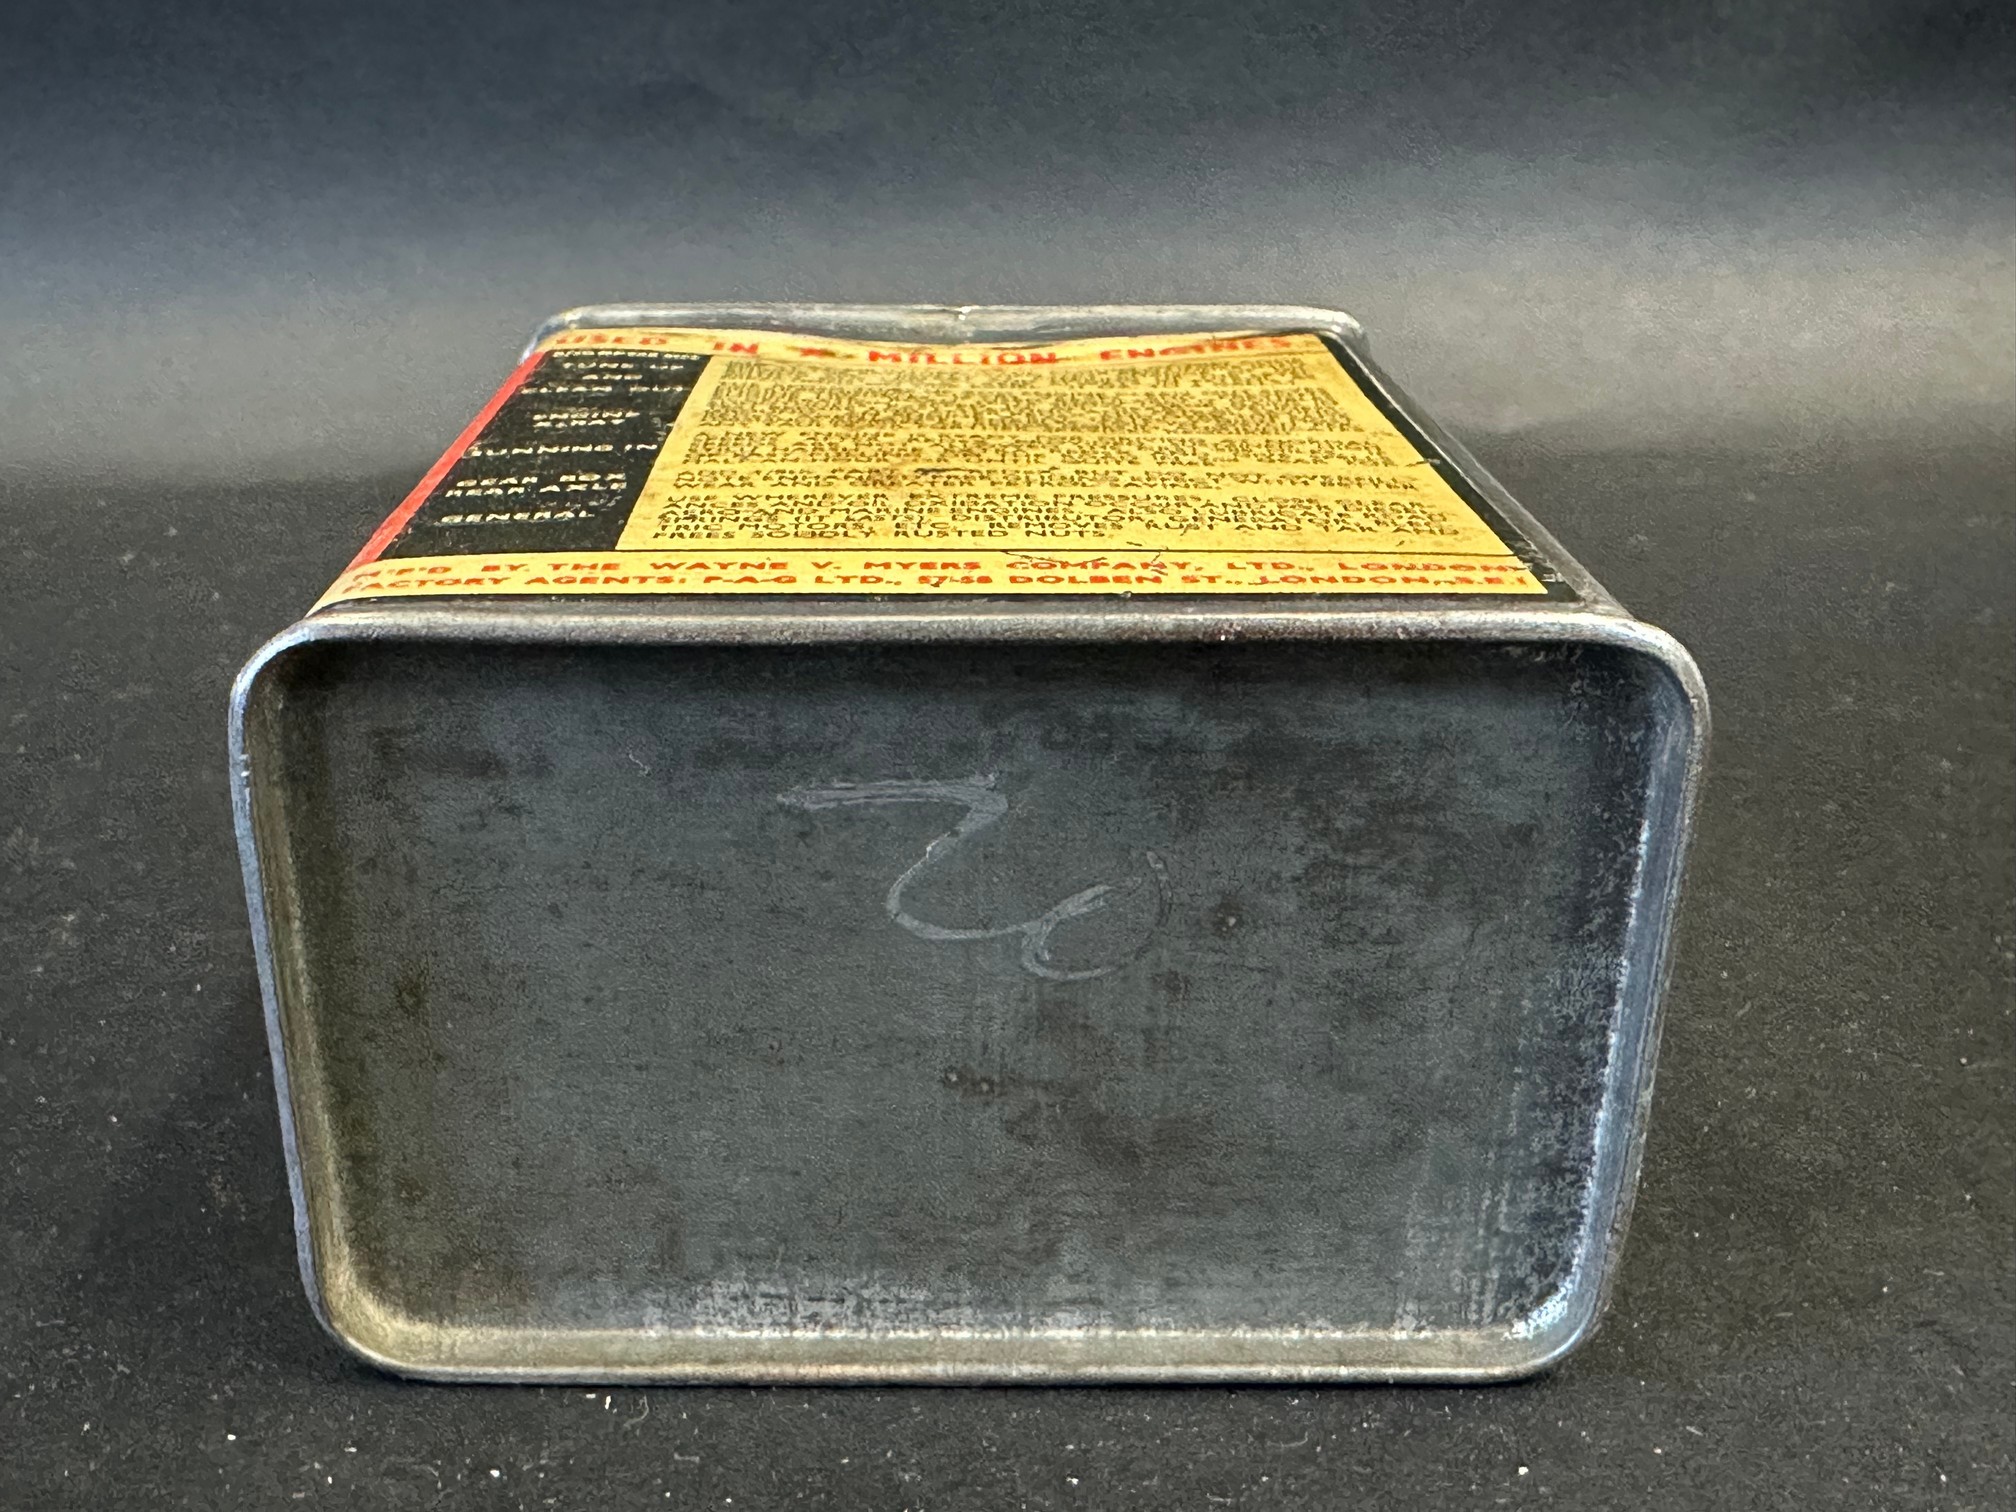 A Redex rectangular additive tin in good condition. - Image 4 of 4